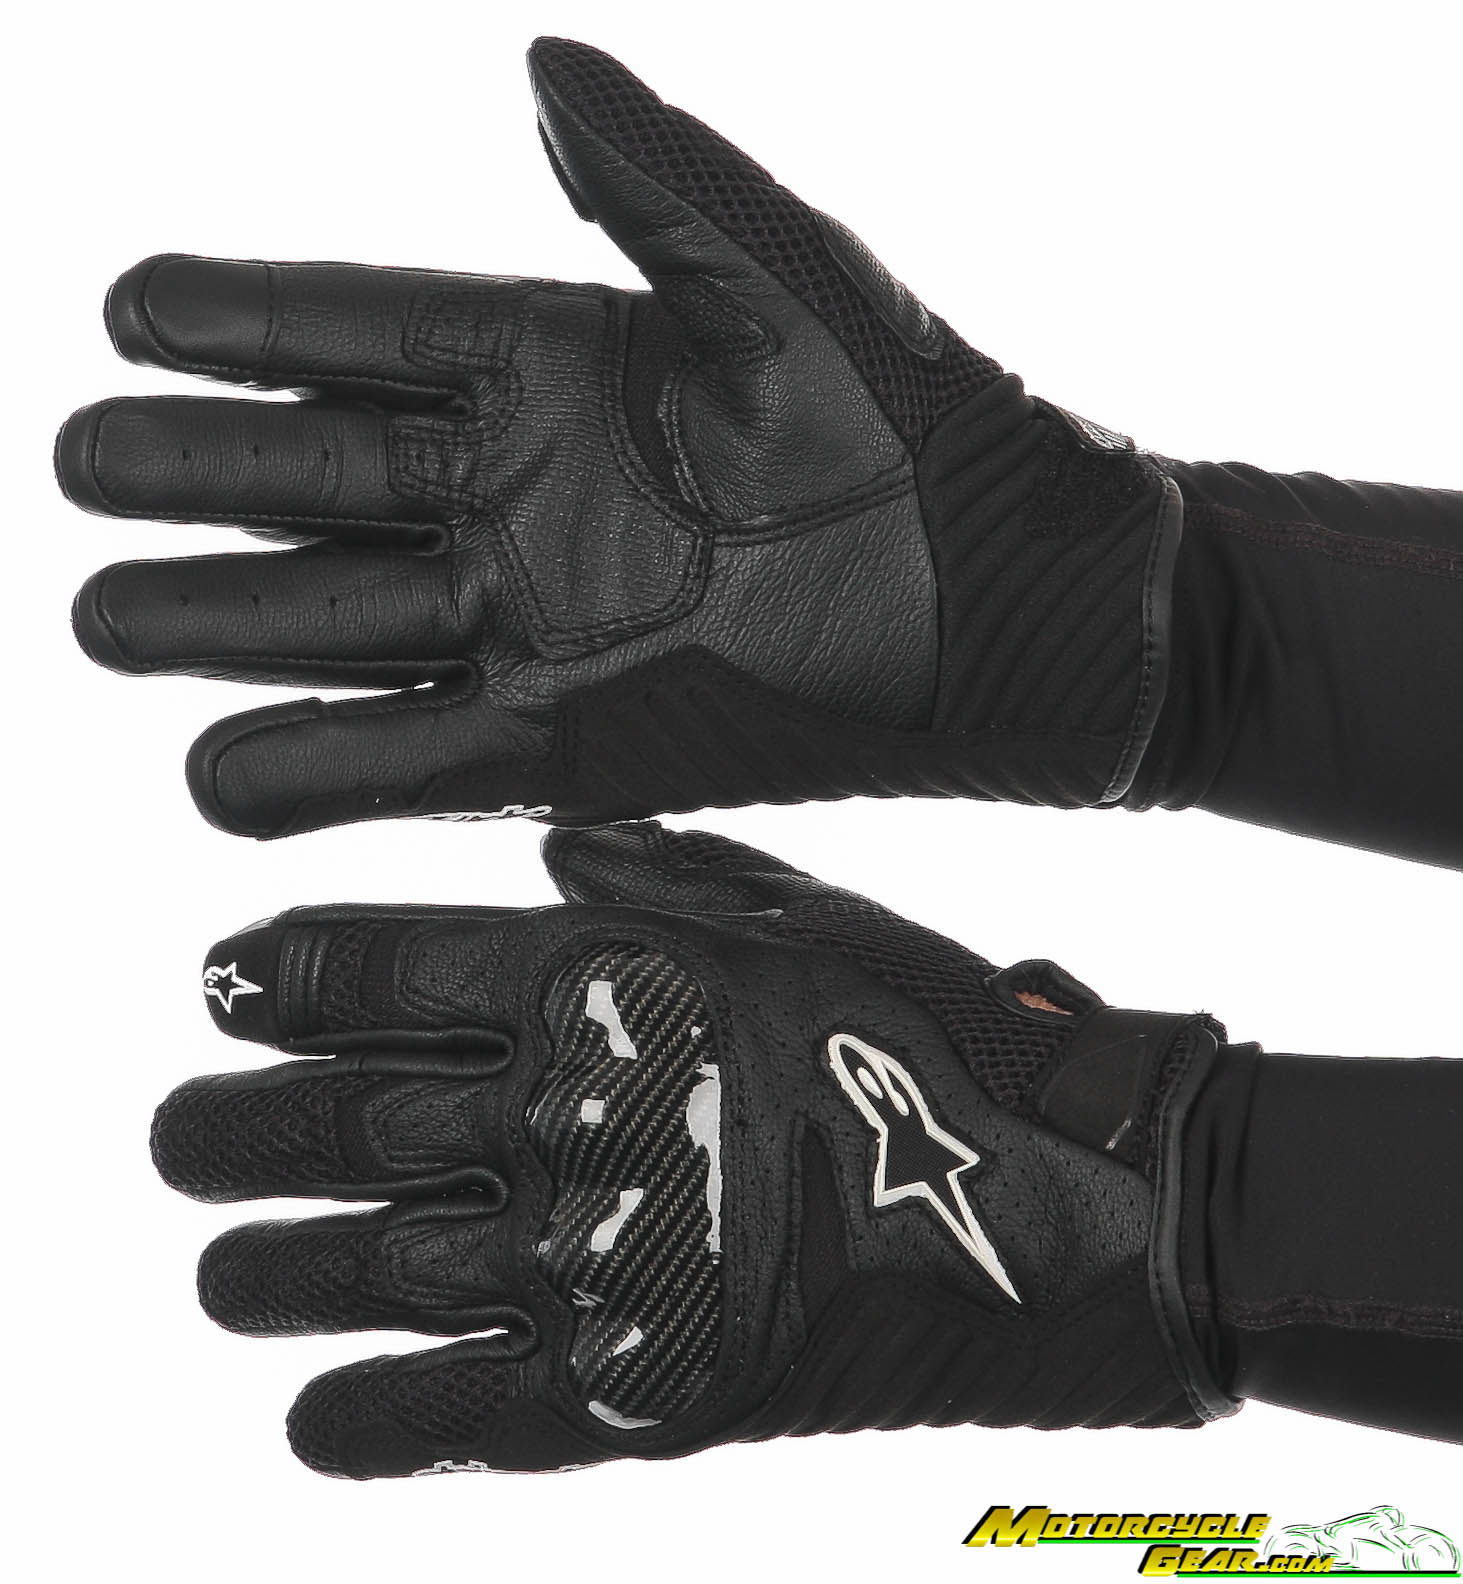 Viewing Images For Alpinestars SMX-1 Air V2 Gloves :: MotorcycleGear.com